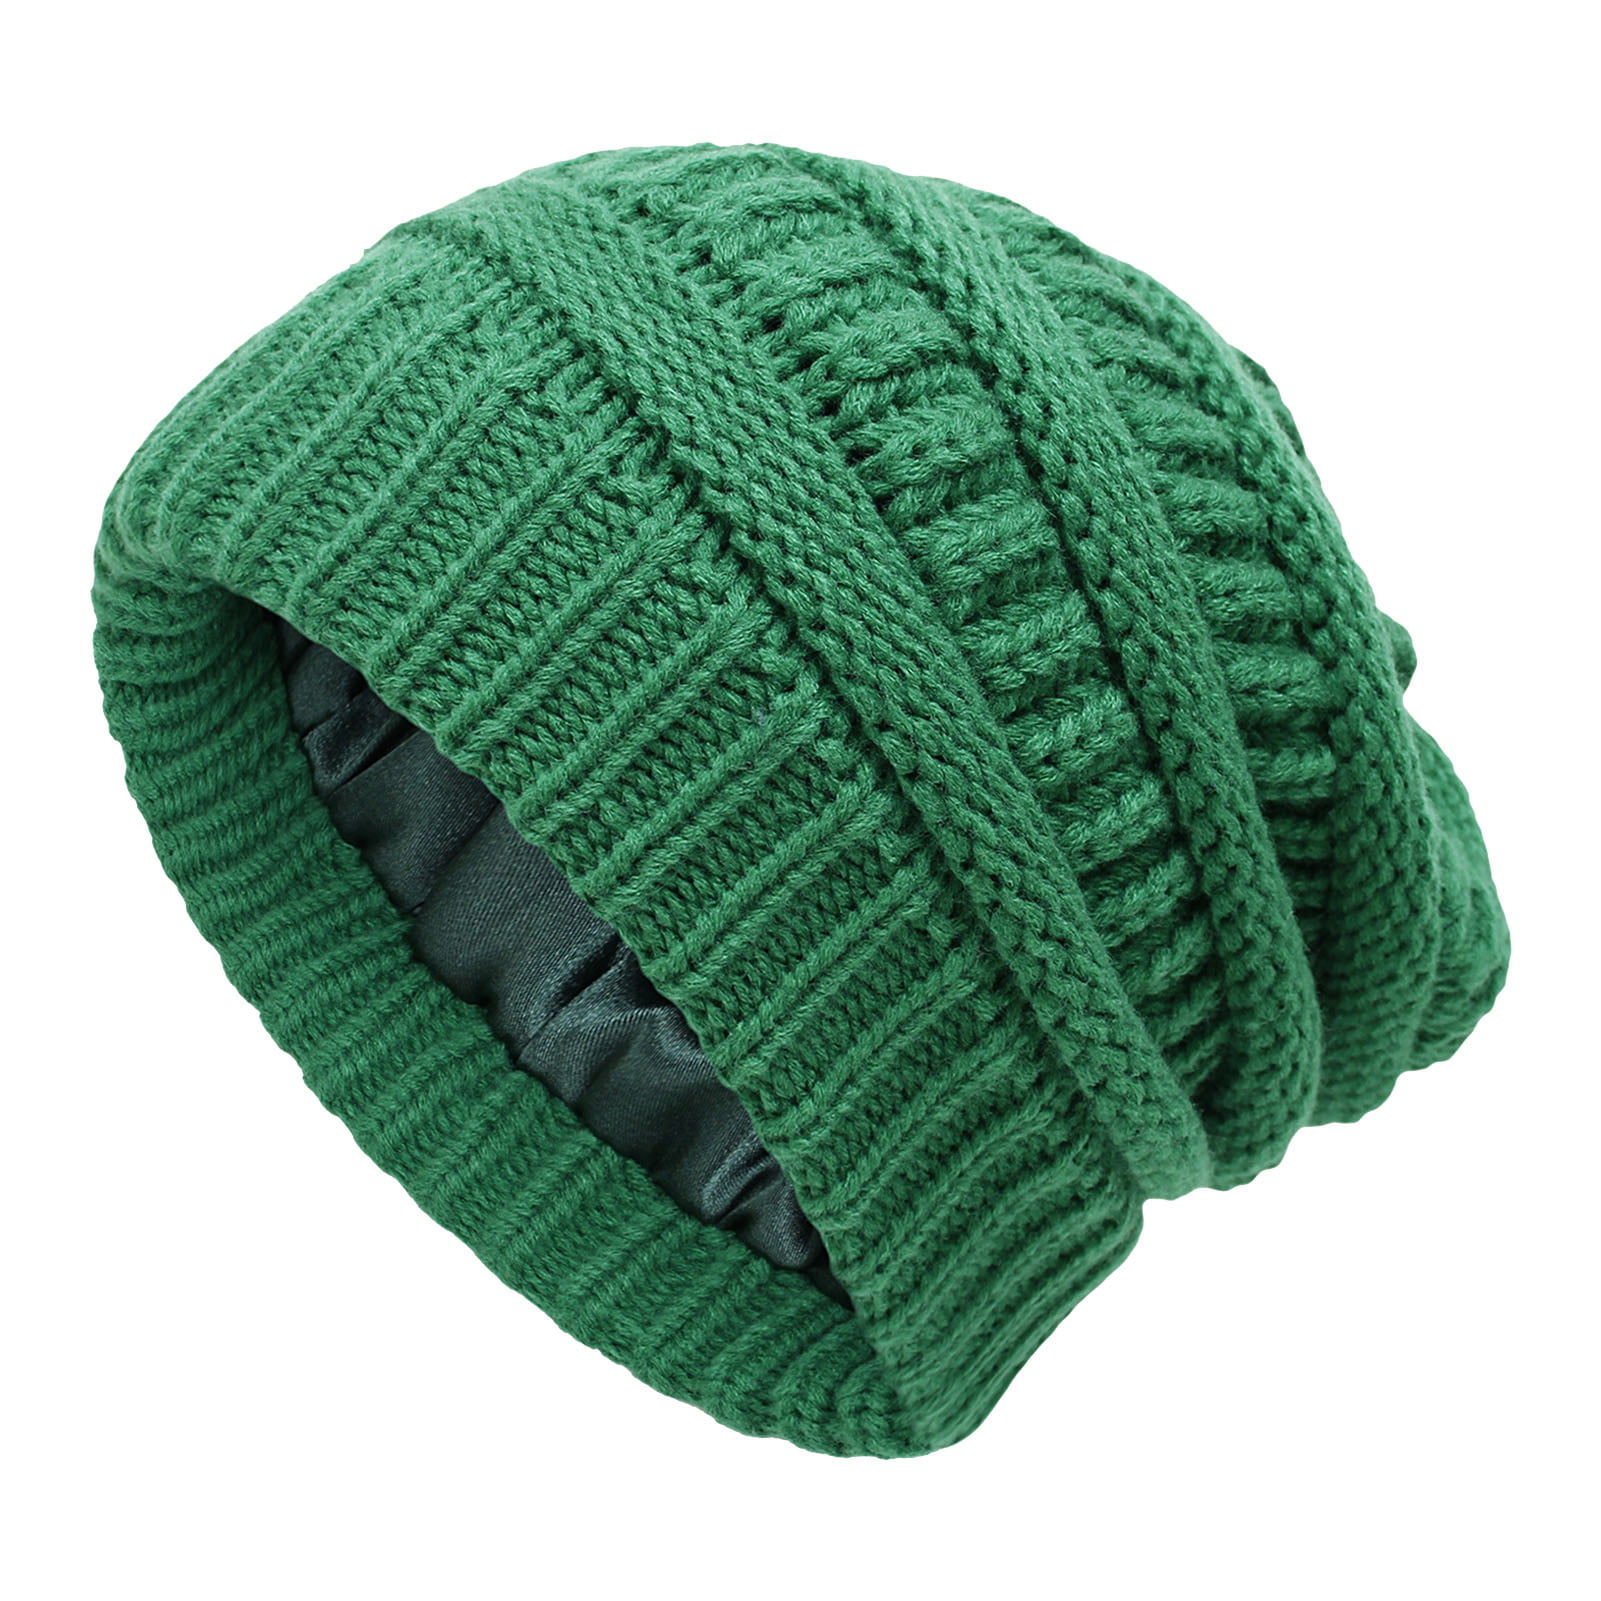 Details about   Slouchy Fleece Lining Knitted Plush Beanie Hat Stretchy Wool Warm Baseball Cap 